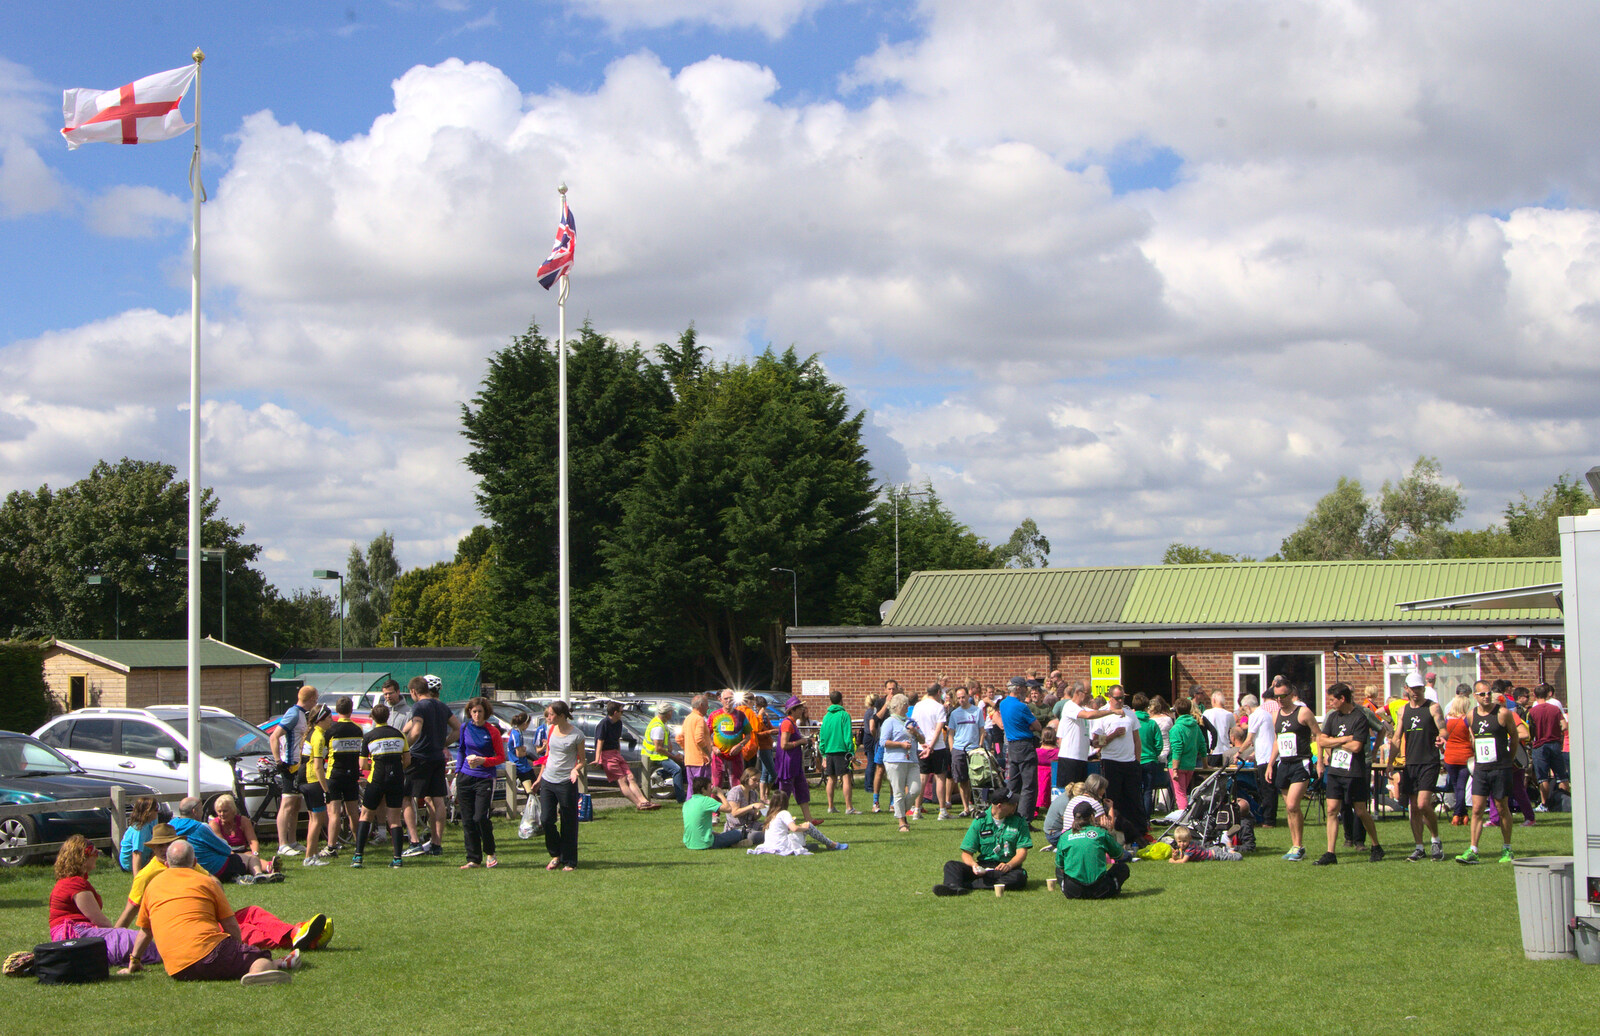 Activity on the playing field from The Framlingham 10k Run, Suffolk - 31st August 2014